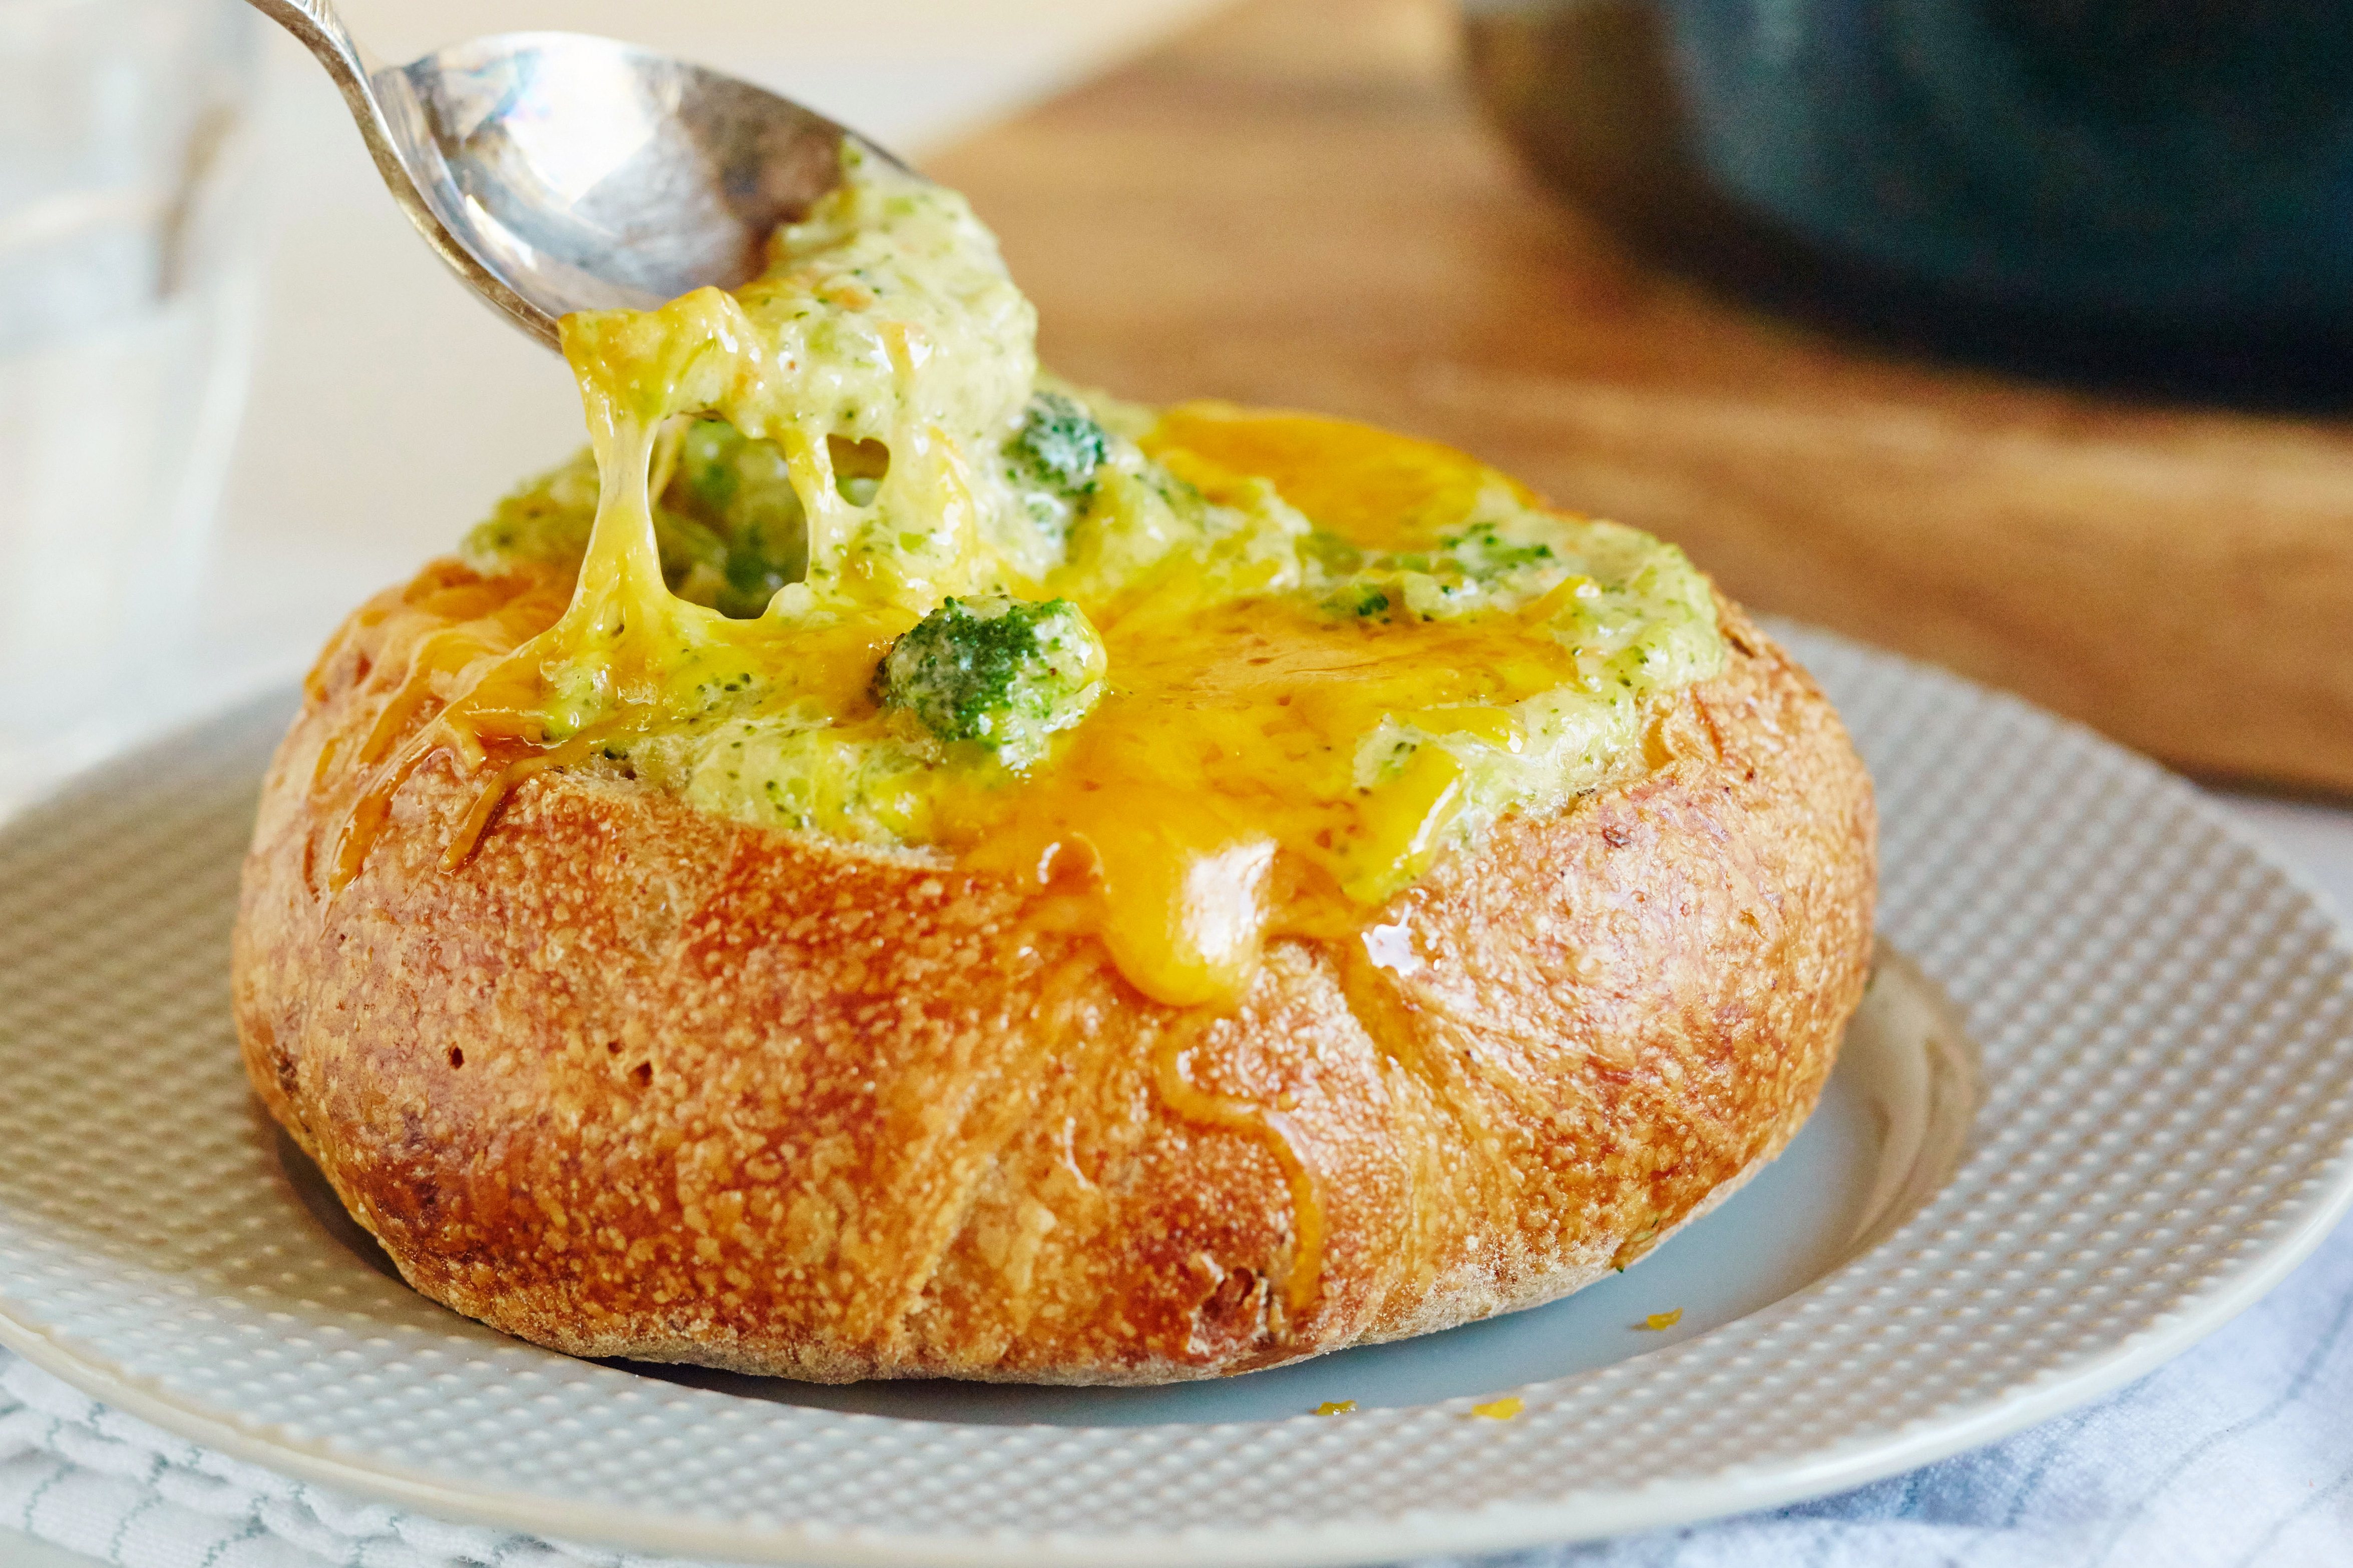 How To Make Better-than-Panera Broccoli Cheese Soup